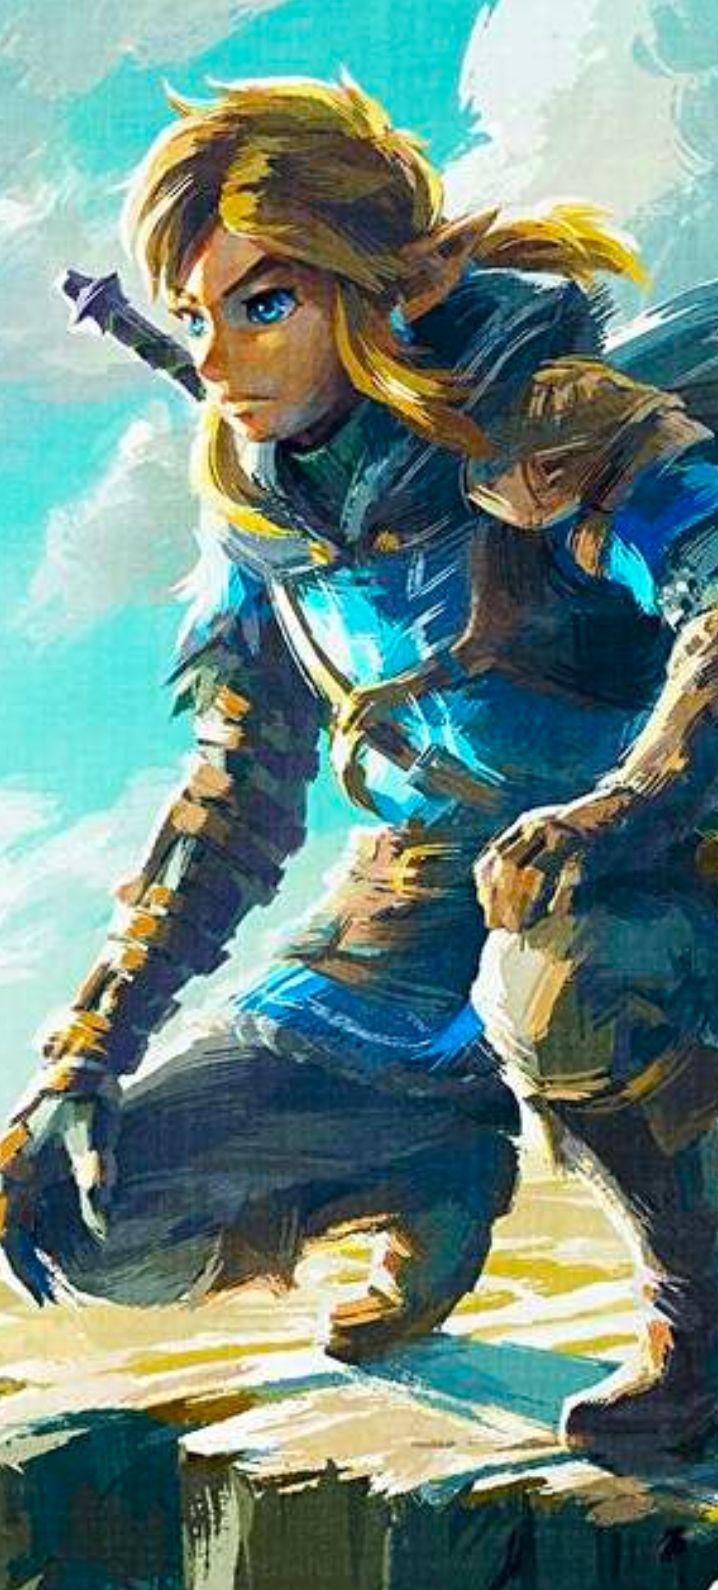 An image of Link from The Legend of Zelda games